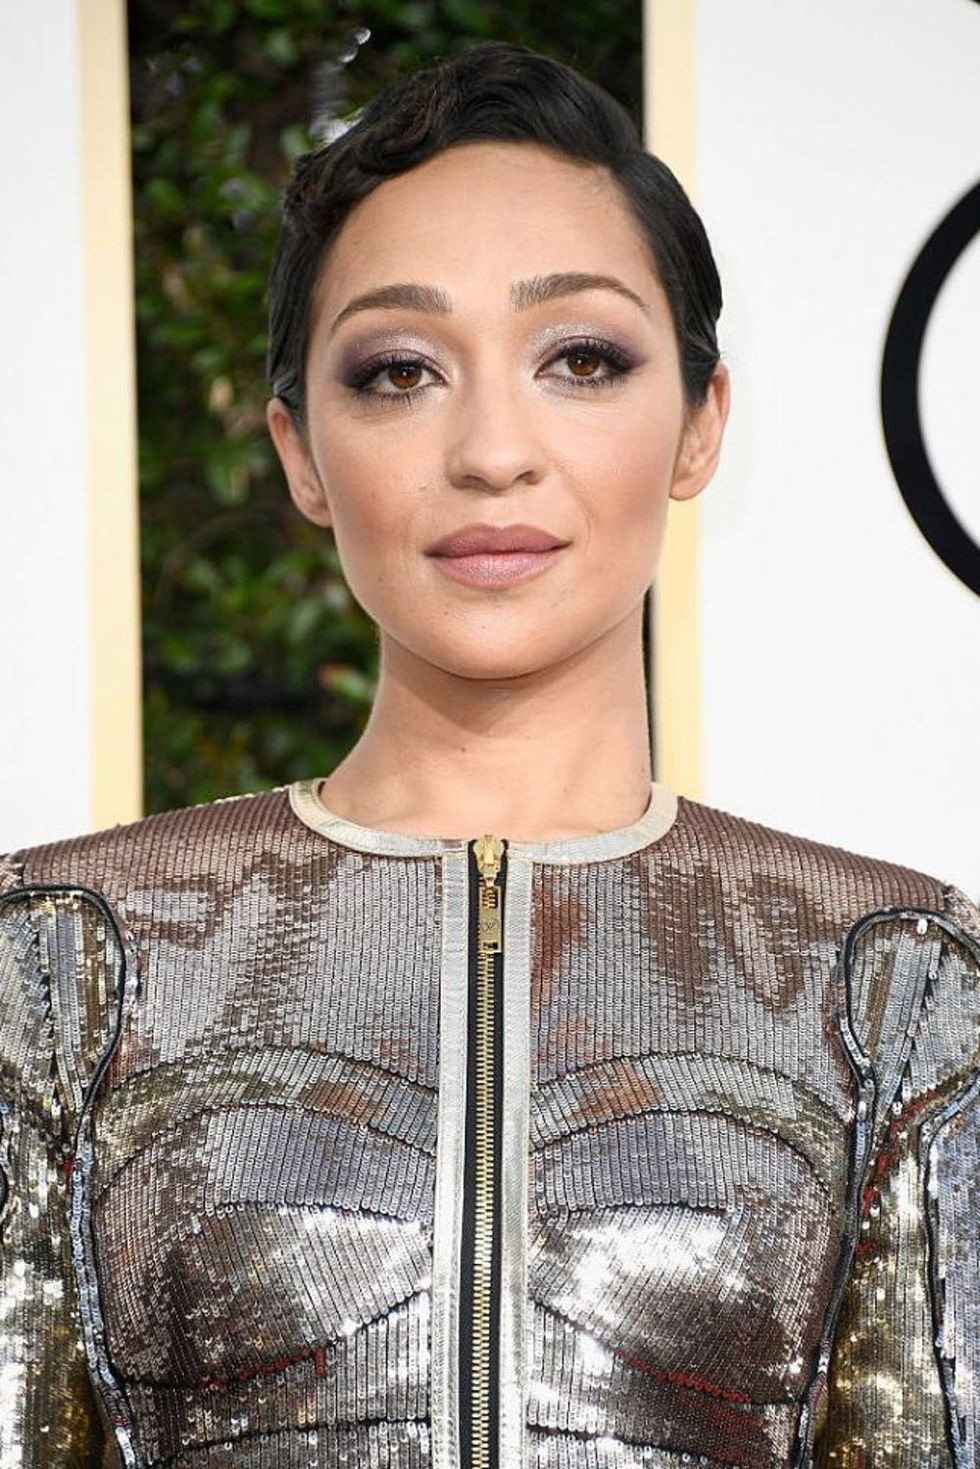 BEVERLY HILLS, CA - JANUARY 08: Actress Ruth Negga attends the 74th Annual Golden Globe Awards at The Beverly Hilton Hotel on January 8, 2017 in Beverly Hills, California. (Photo by Frazer Harrison/Getty Images)